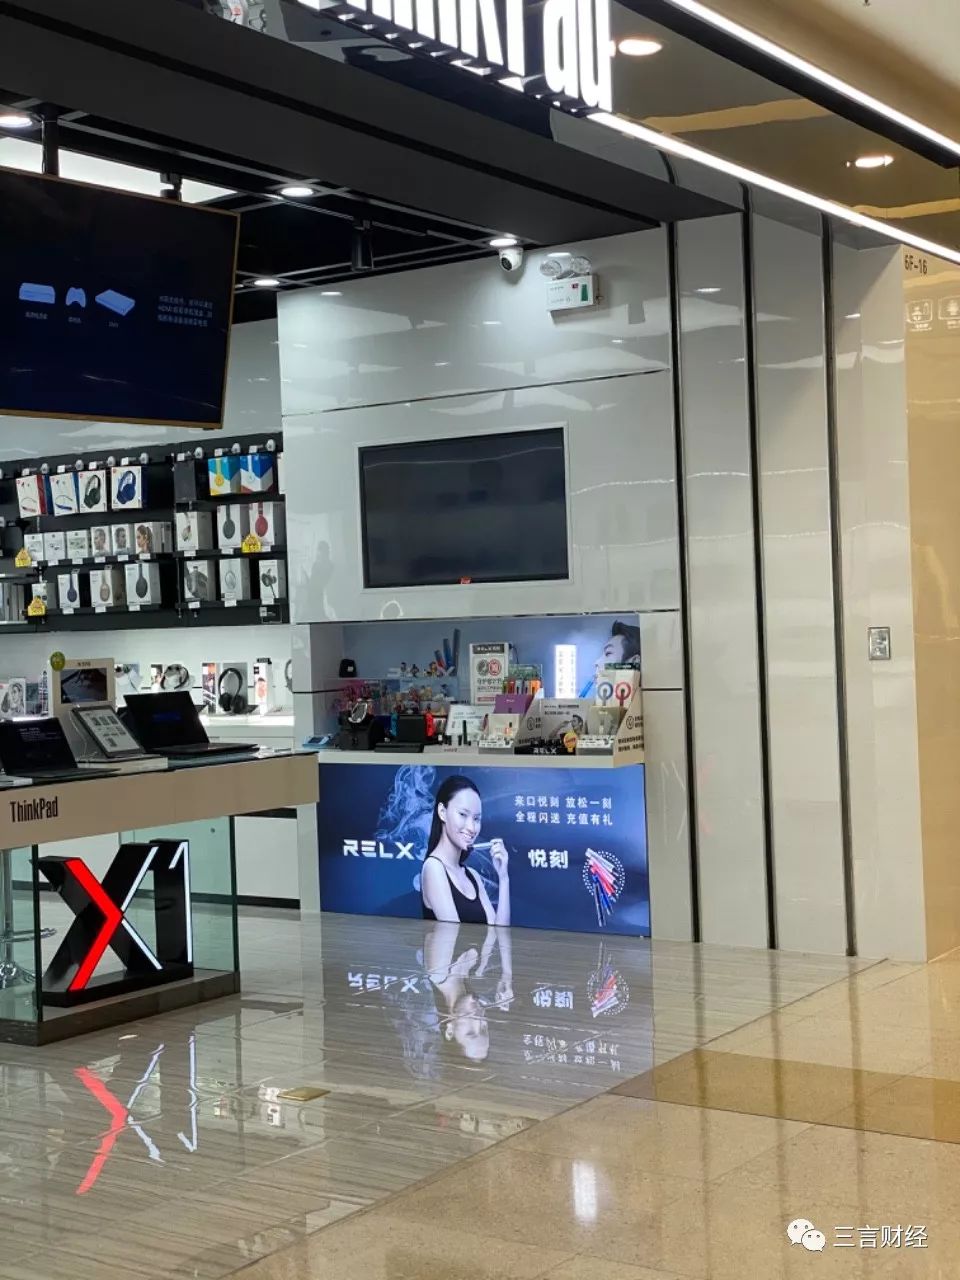 Research on the status quo under the electronic cigarette line: the store door can be arbitrarily, plus WeChat can be 包邮, there is a small store ready to stop selling